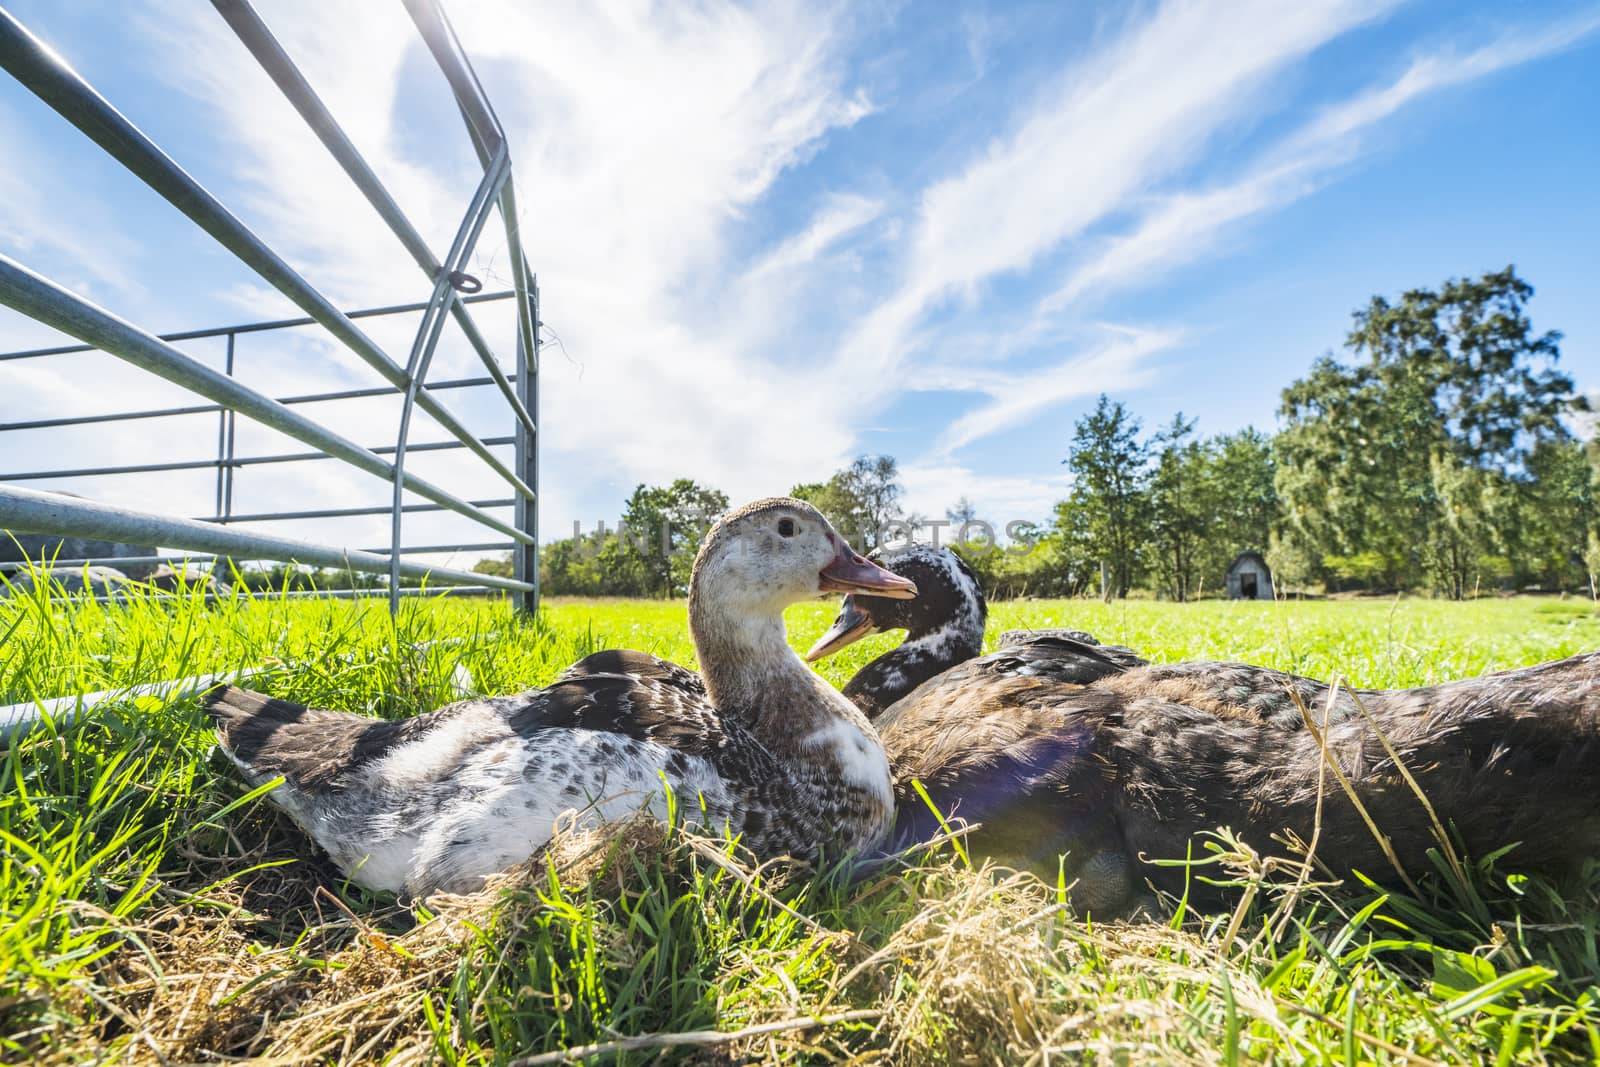 Ducks relaxing in the sun on green grass in the summer in an idyllic countryside